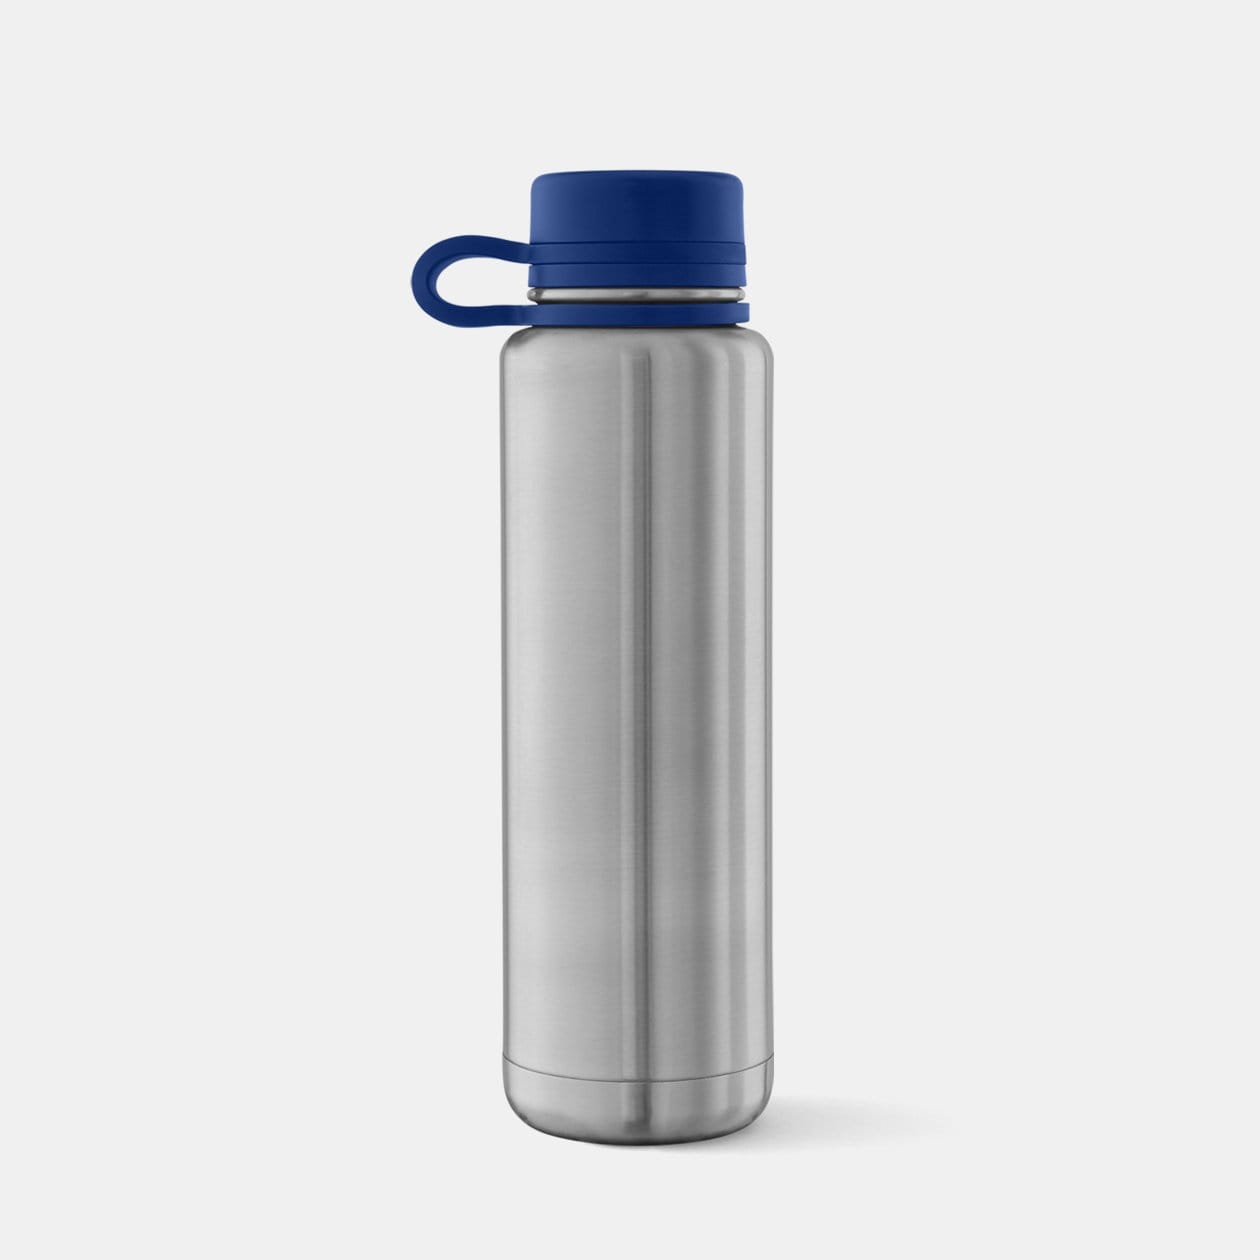 3x Portable Durable Waterproof Container Bottle with Lanyard Blue 